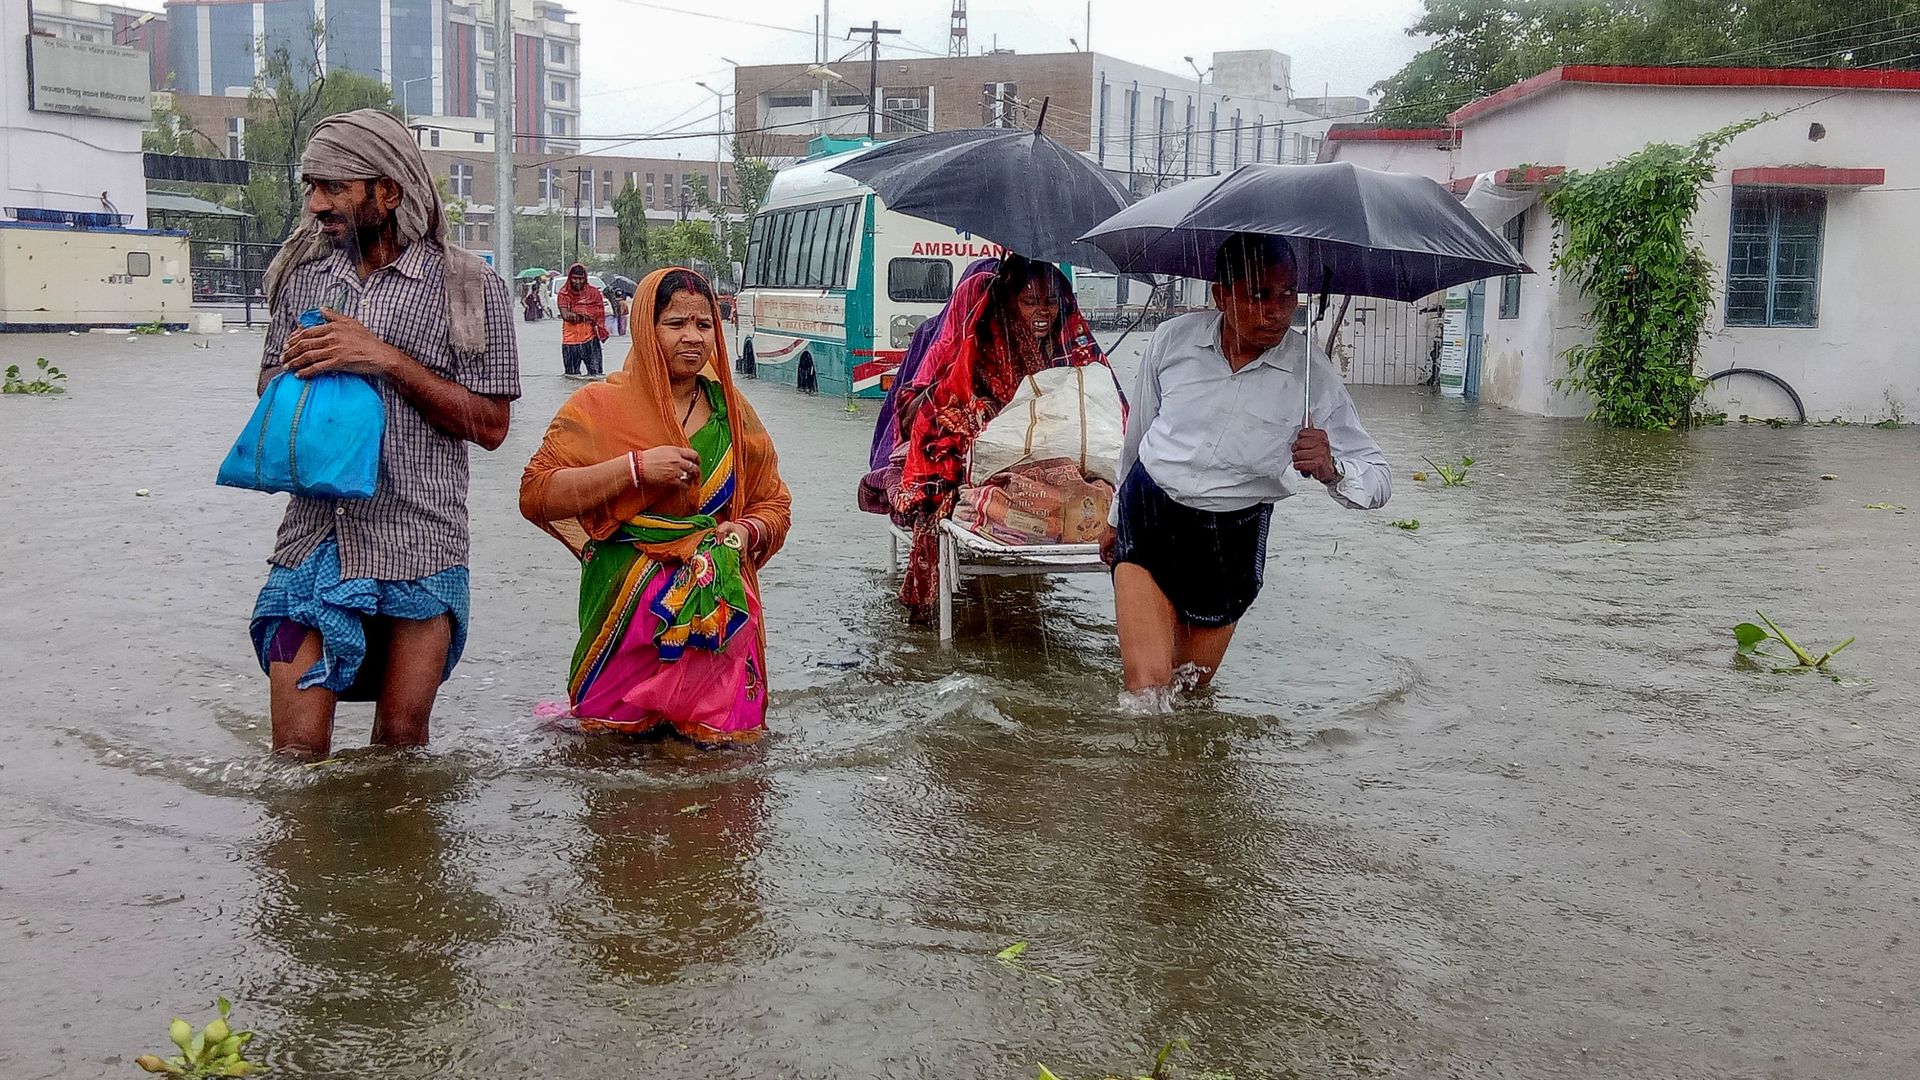 Patients wade through floodwaters on their way to hospital during heavy monsoon rain in Patna in the northeastern state of Bihar on September 28